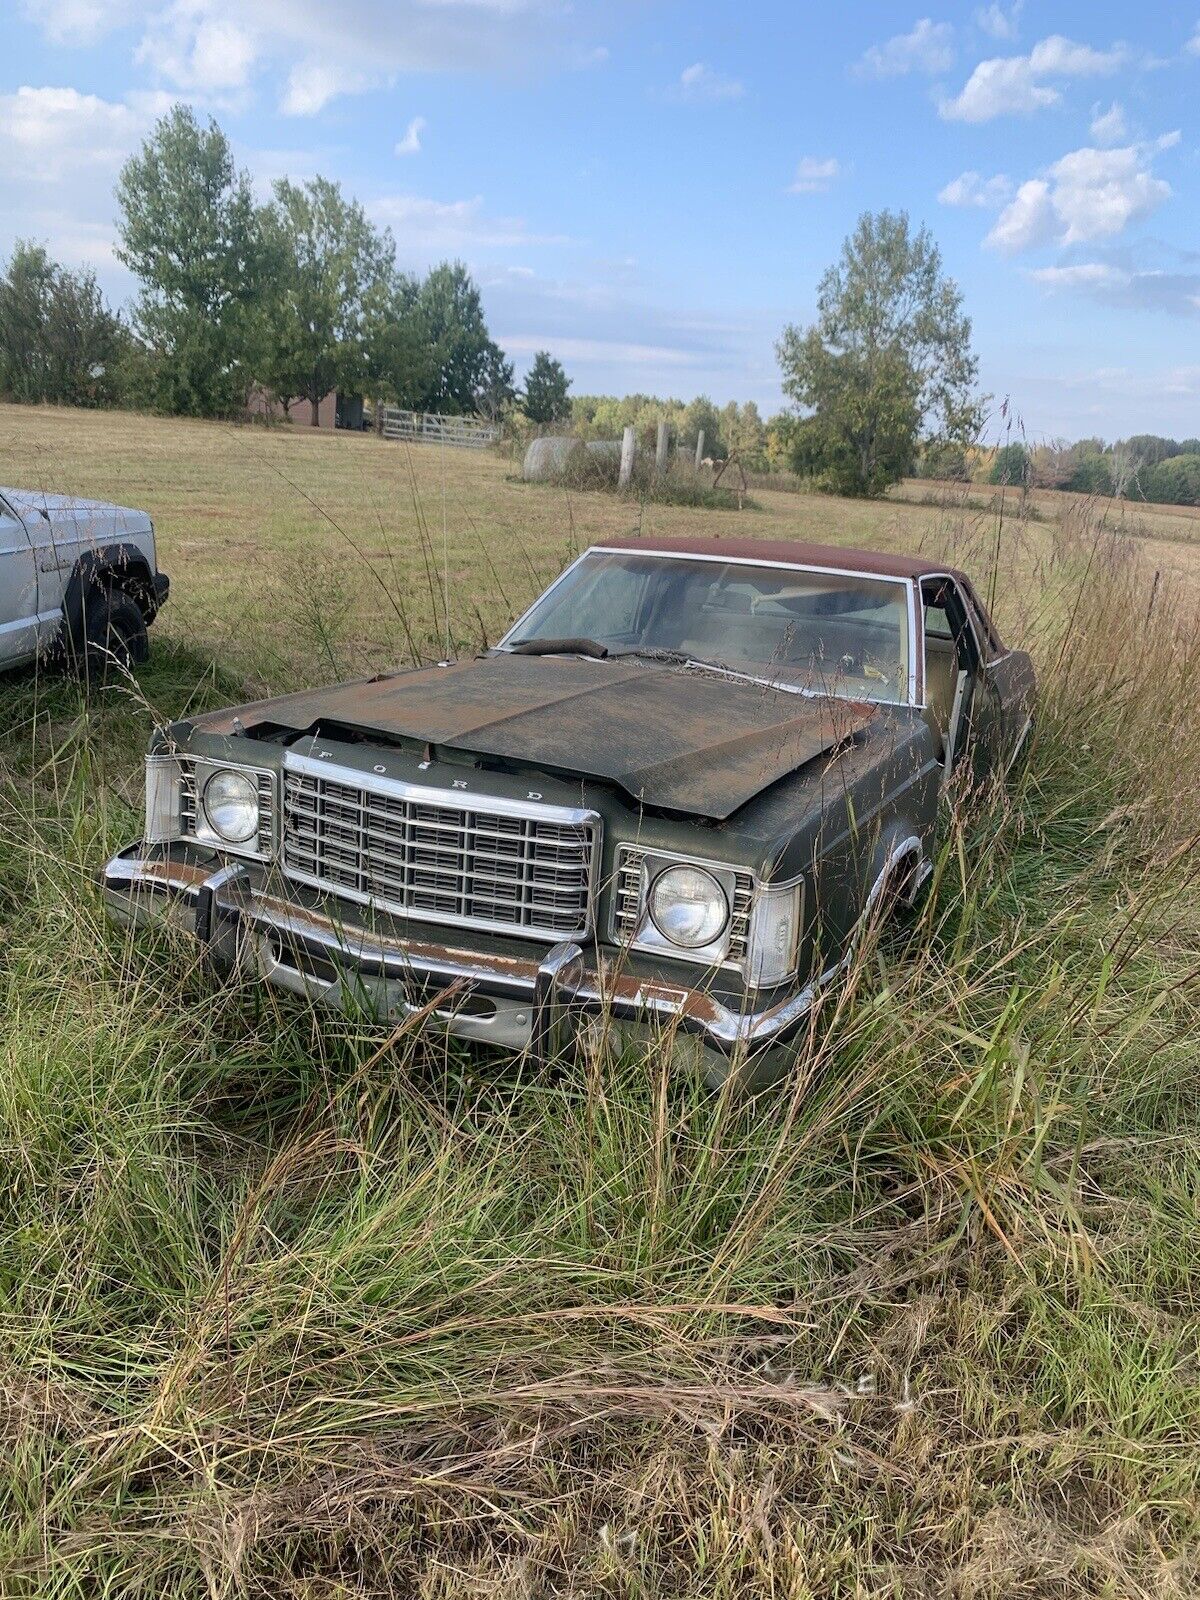 1977 Ford Granada Parts Message Me If You Are Looking For Parts Off The Car